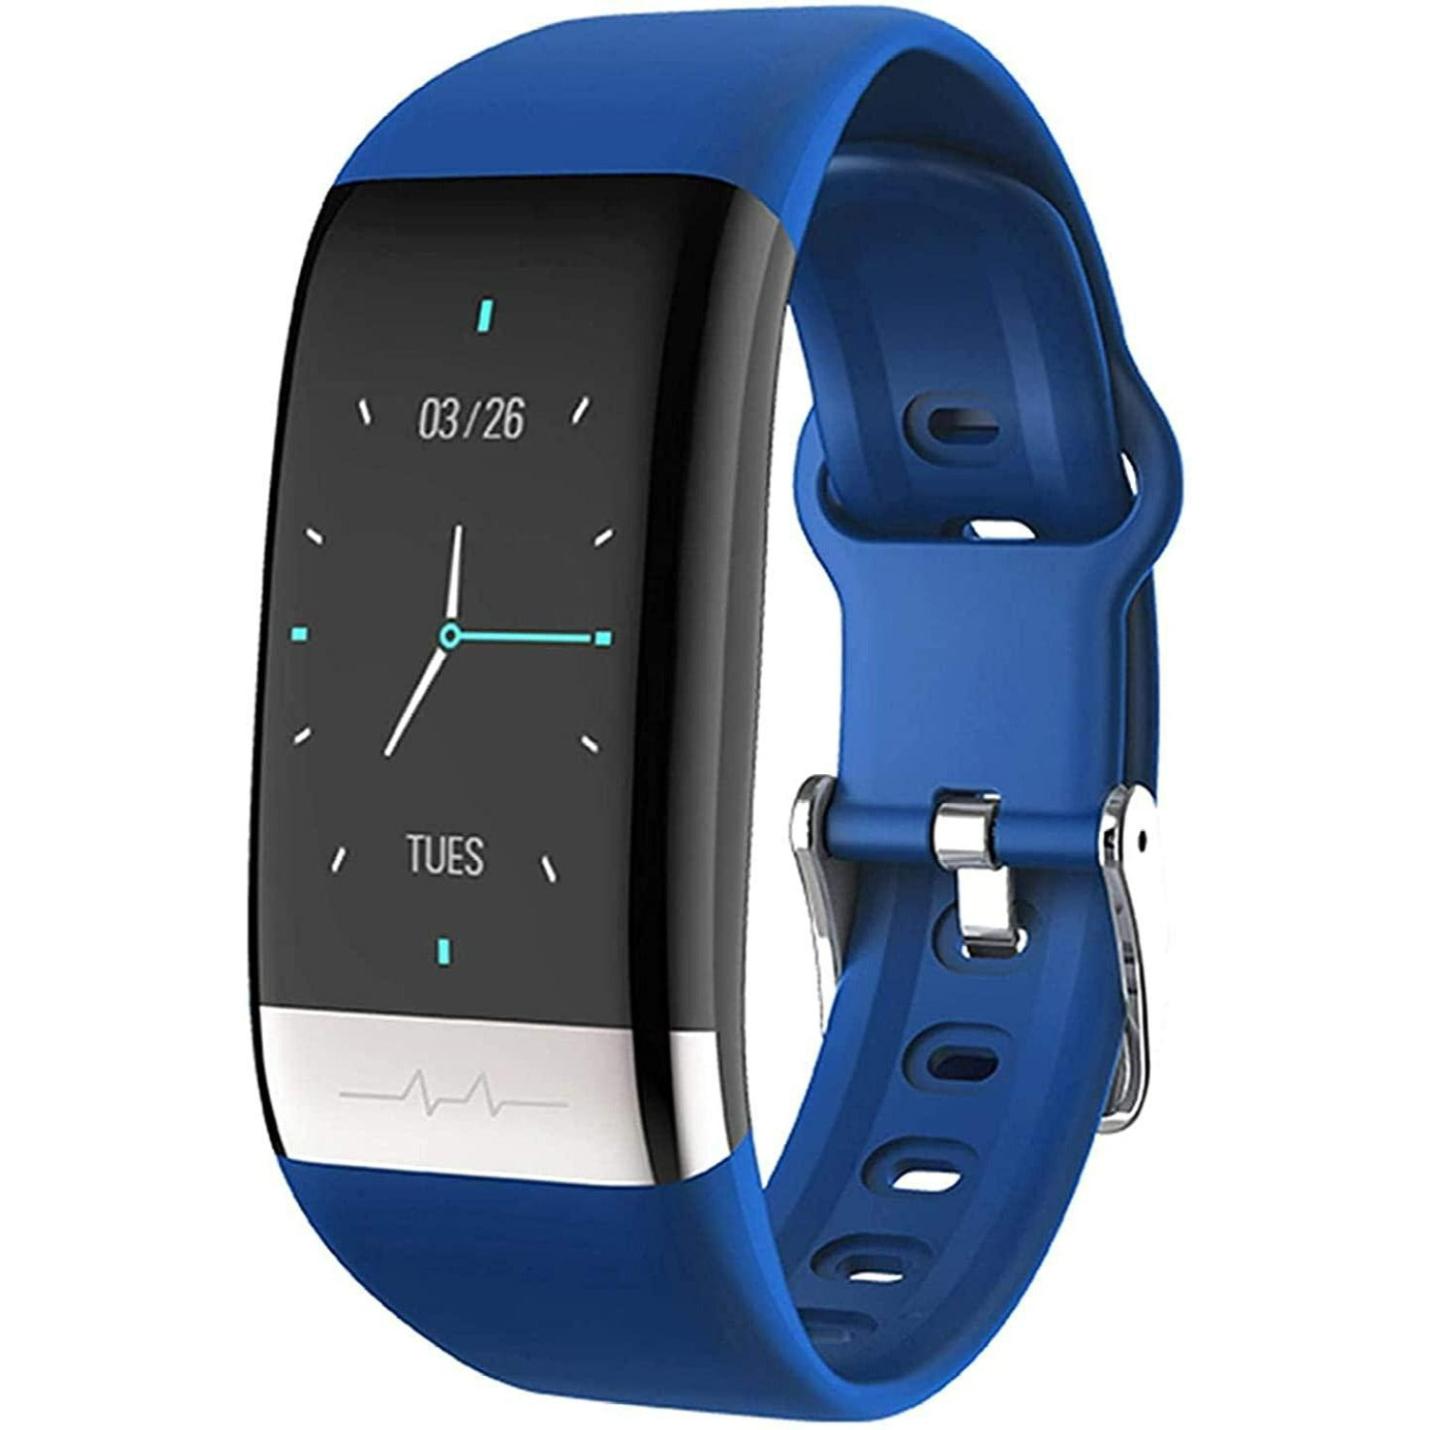 IP67 Waterproof Fitness Tracker - Heart Rate and Blood Pressure Monitor - Step Counter